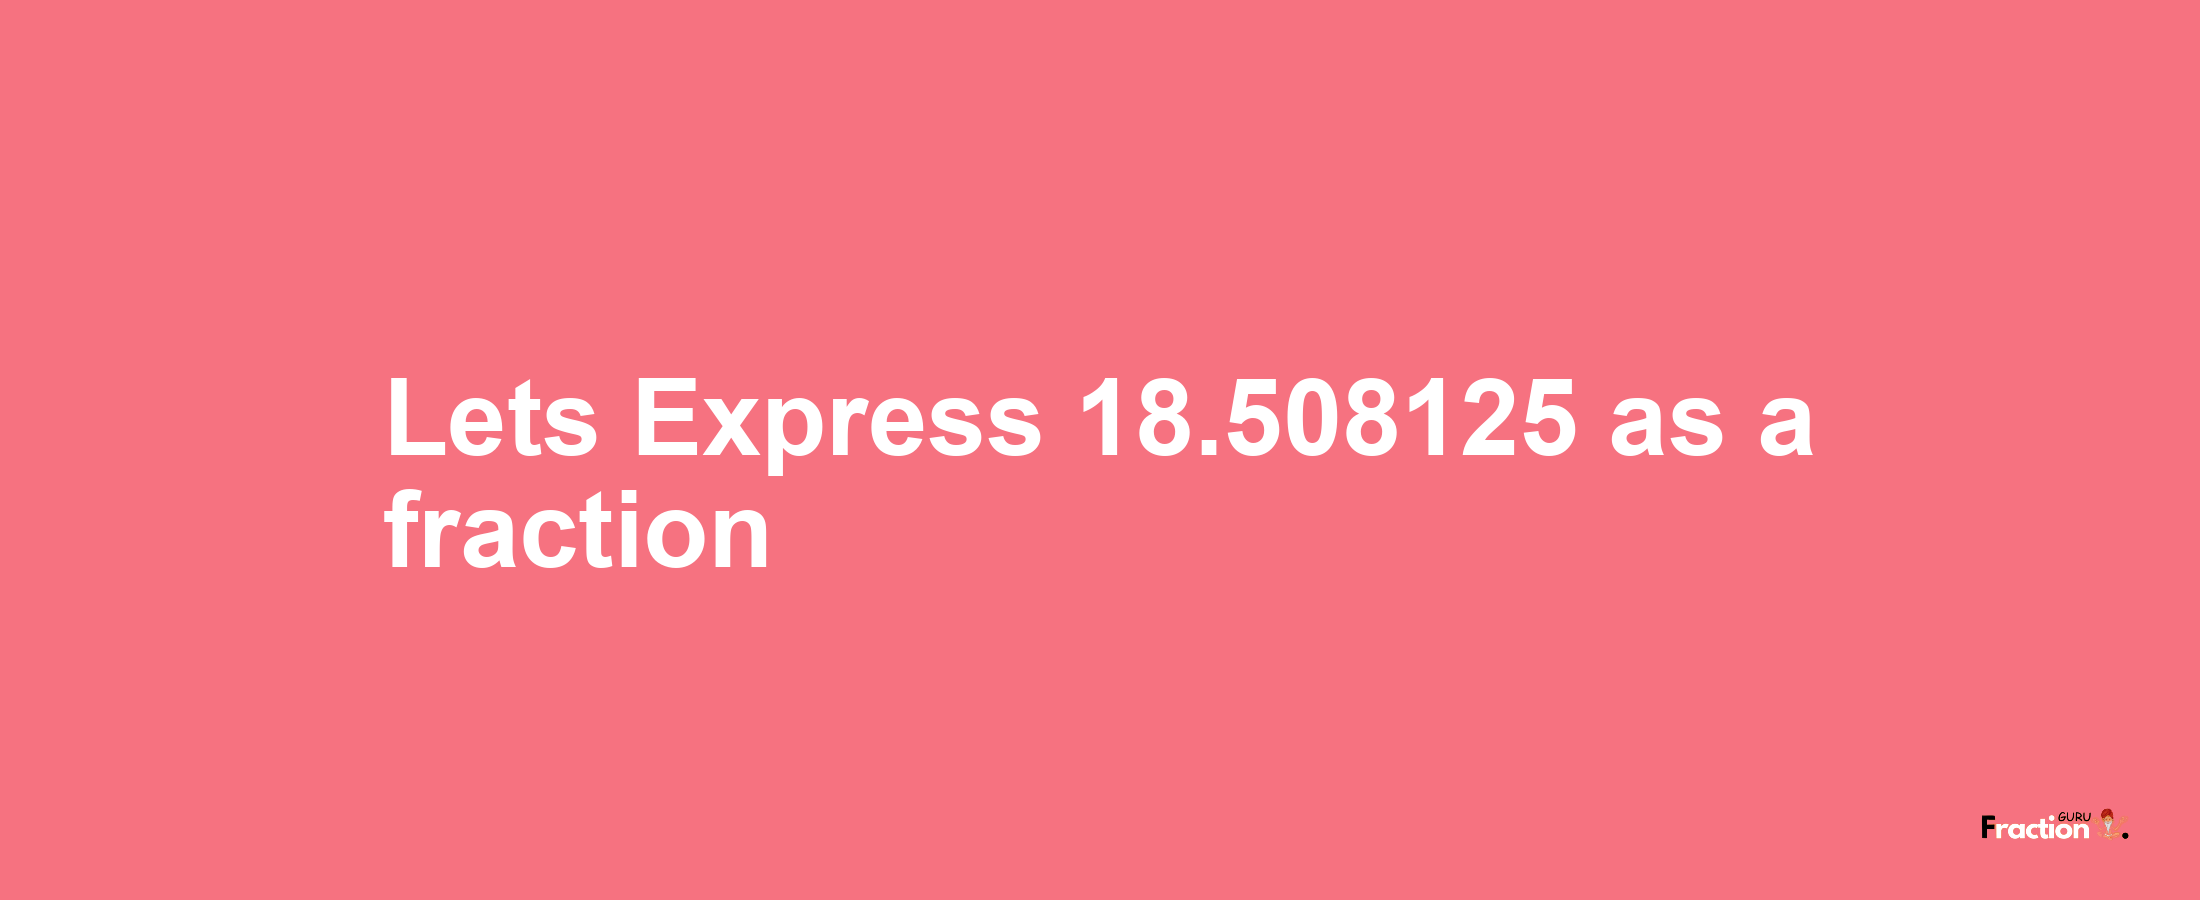 Lets Express 18.508125 as afraction